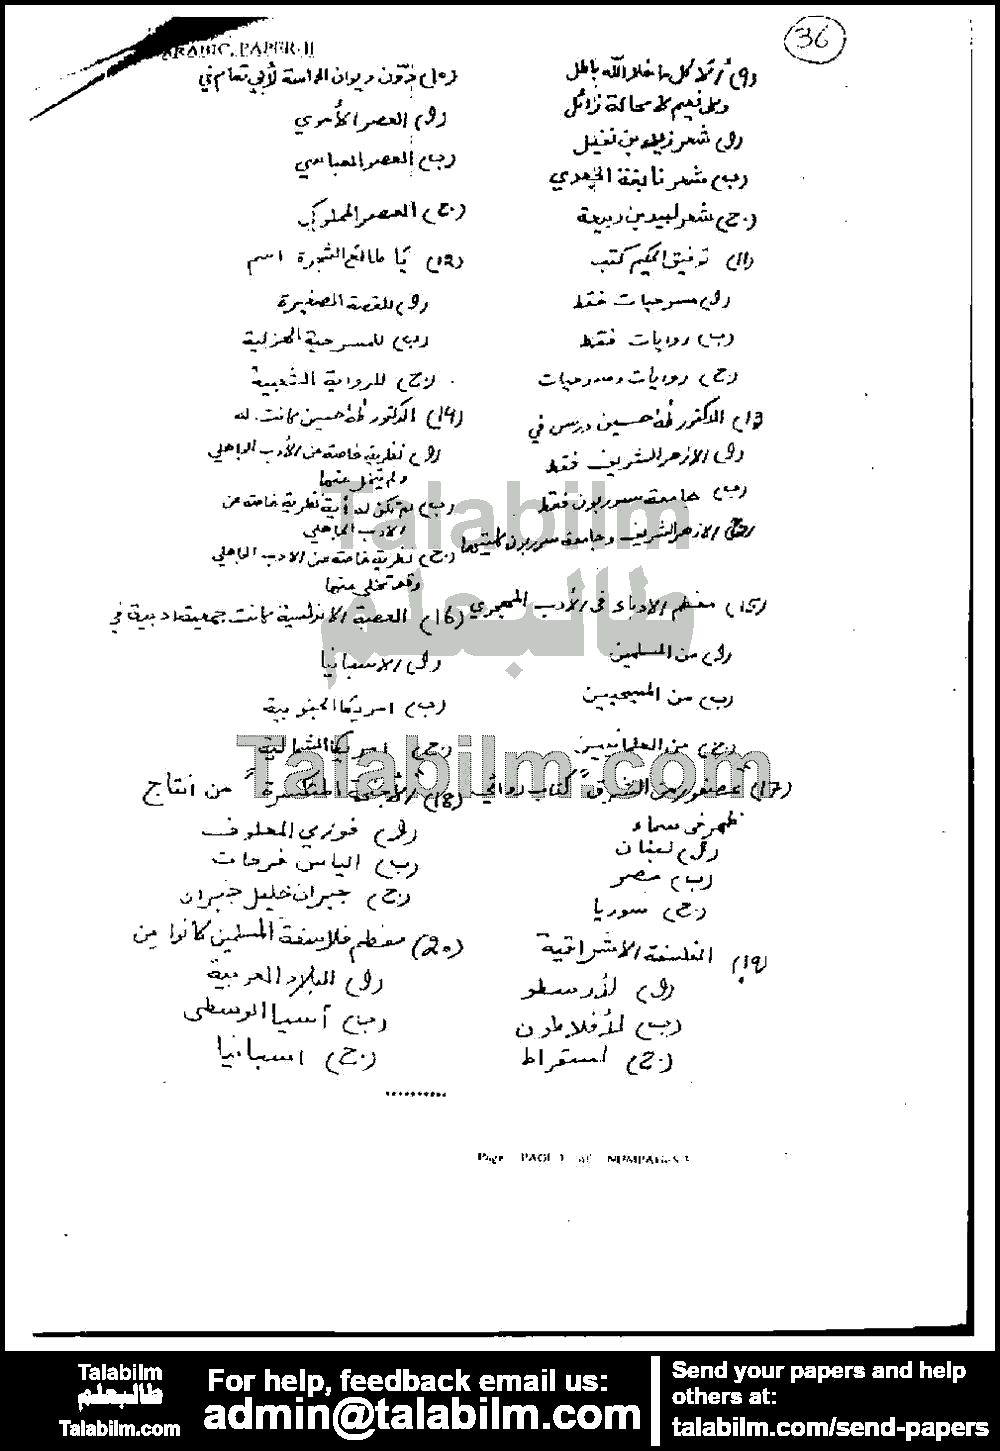 Arabic 0 past paper for 2002 Page No. 5